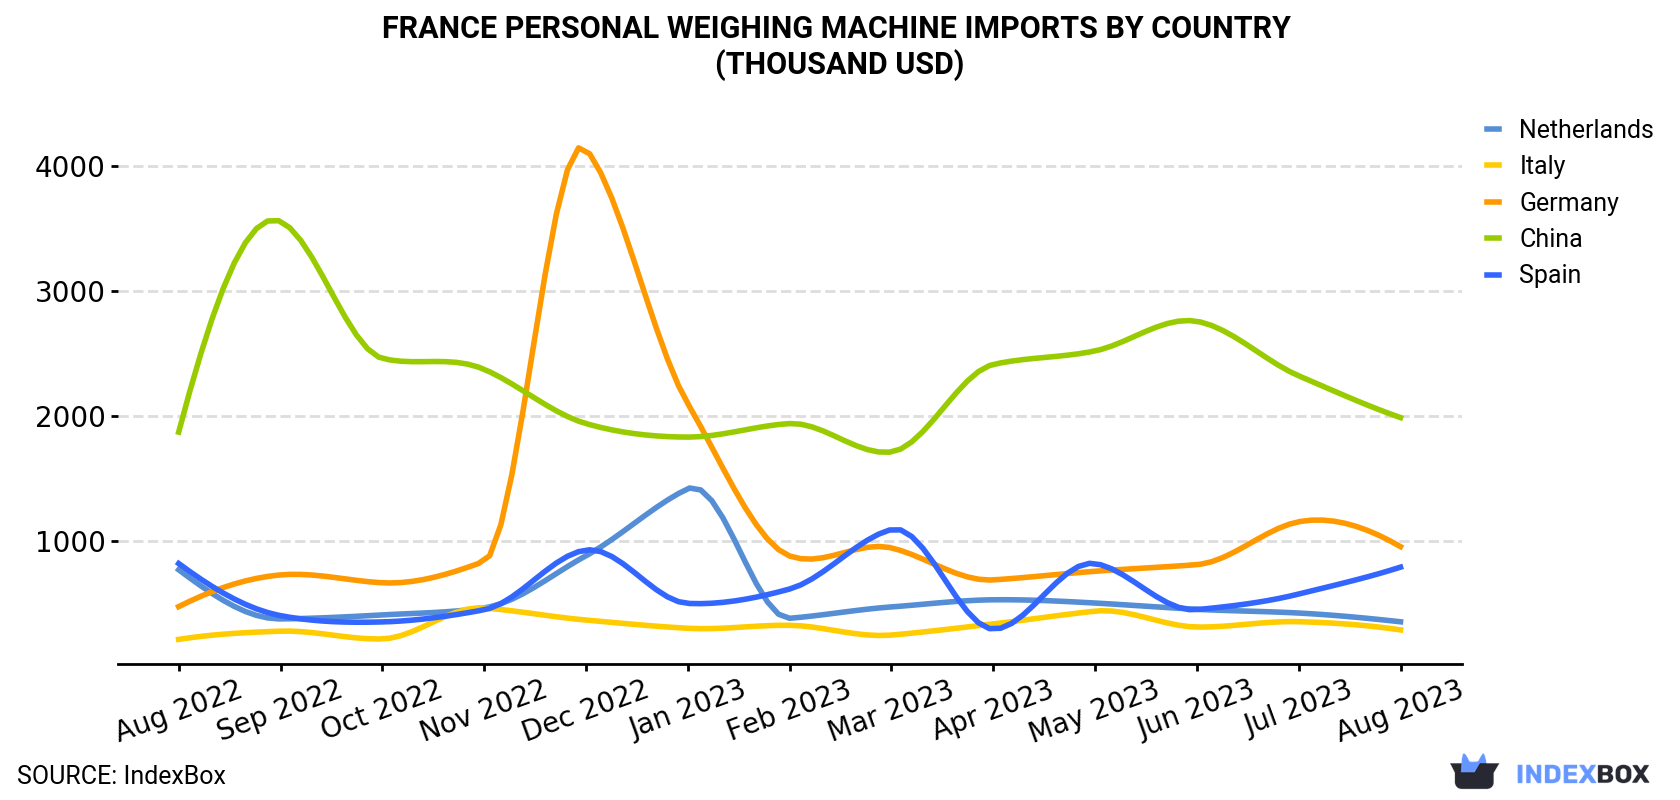 France Personal Weighing Machine Imports By Country (Thousand USD)